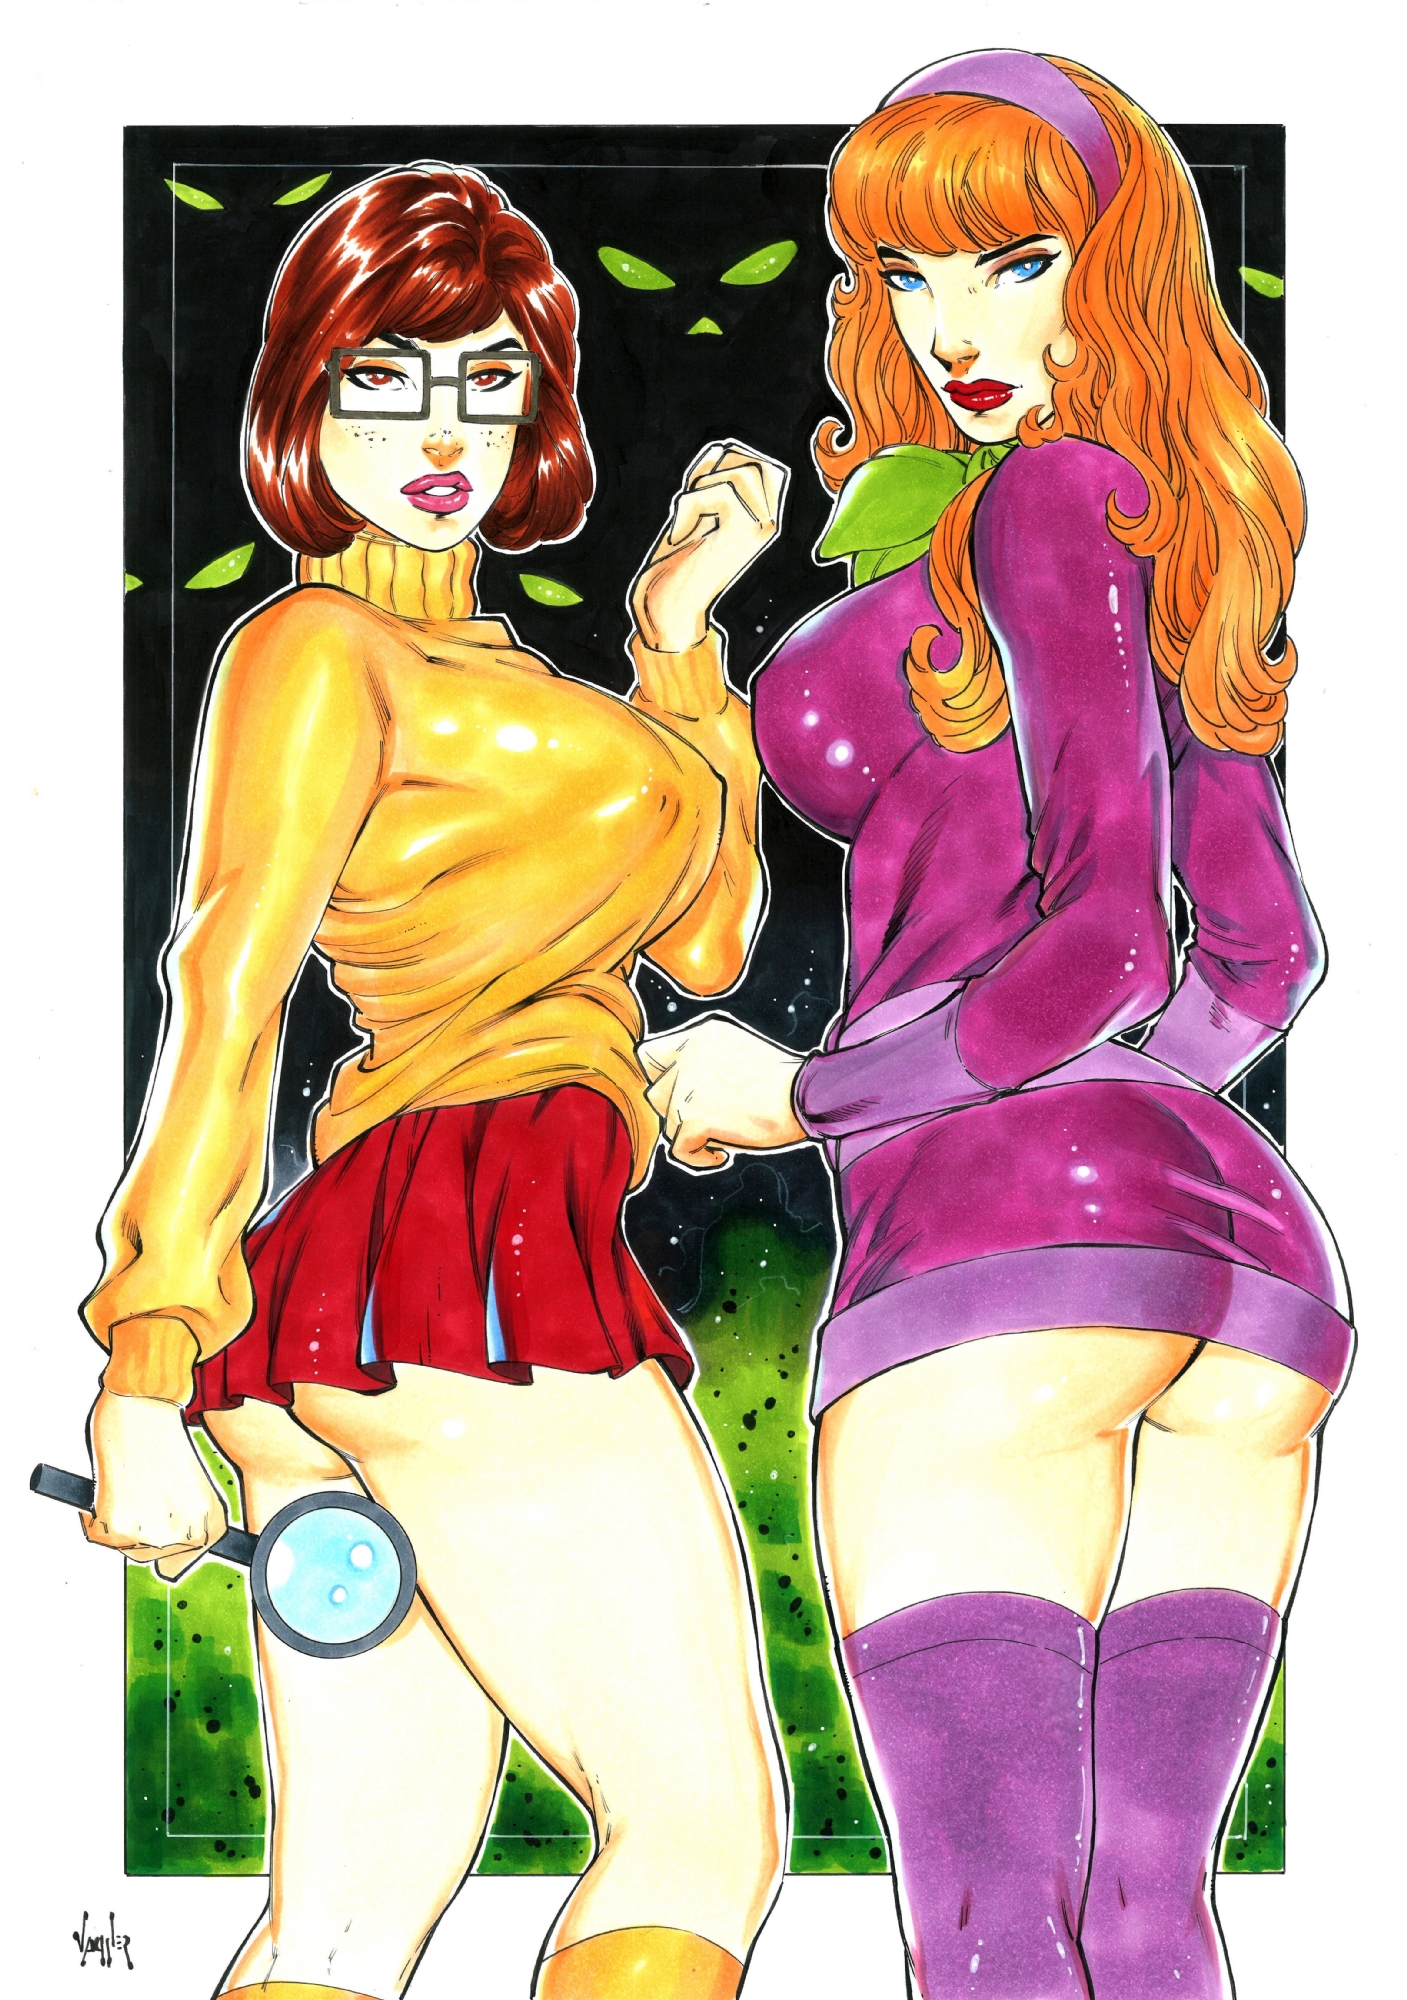 Daphne Blake and Velma Dinkley by Carlos Gomez, in A I's Pin-Ups  (Scooby-Doo) Comic Art Gallery Room